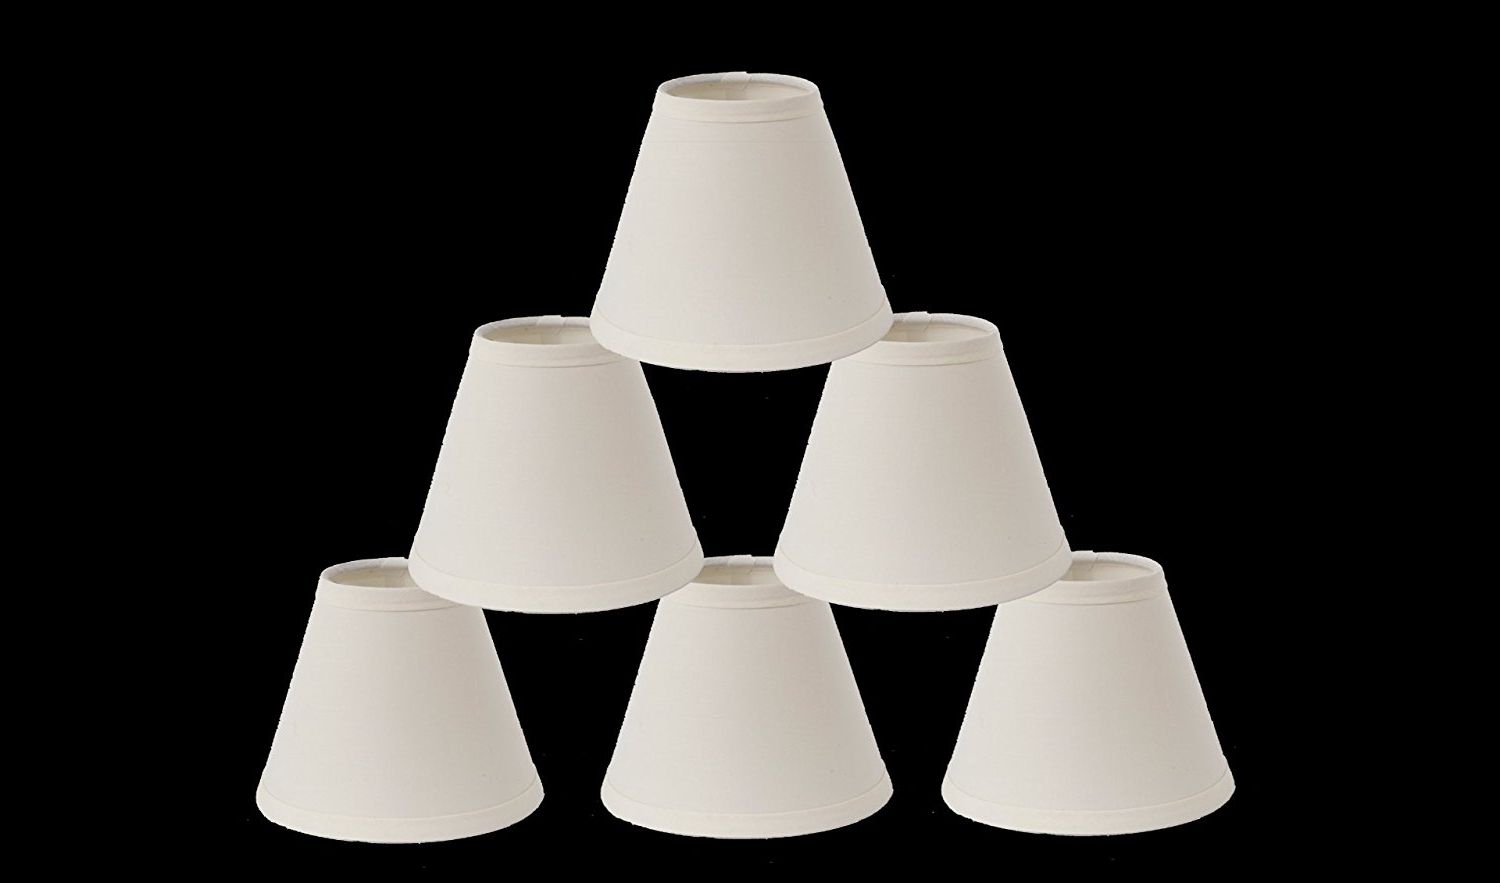 Popular Chandelier Lamp Shades Intended For Urbanest 1100327c Mini Chandelier Lamp Shades 6 Inch, Cotton (View 14 of 15)